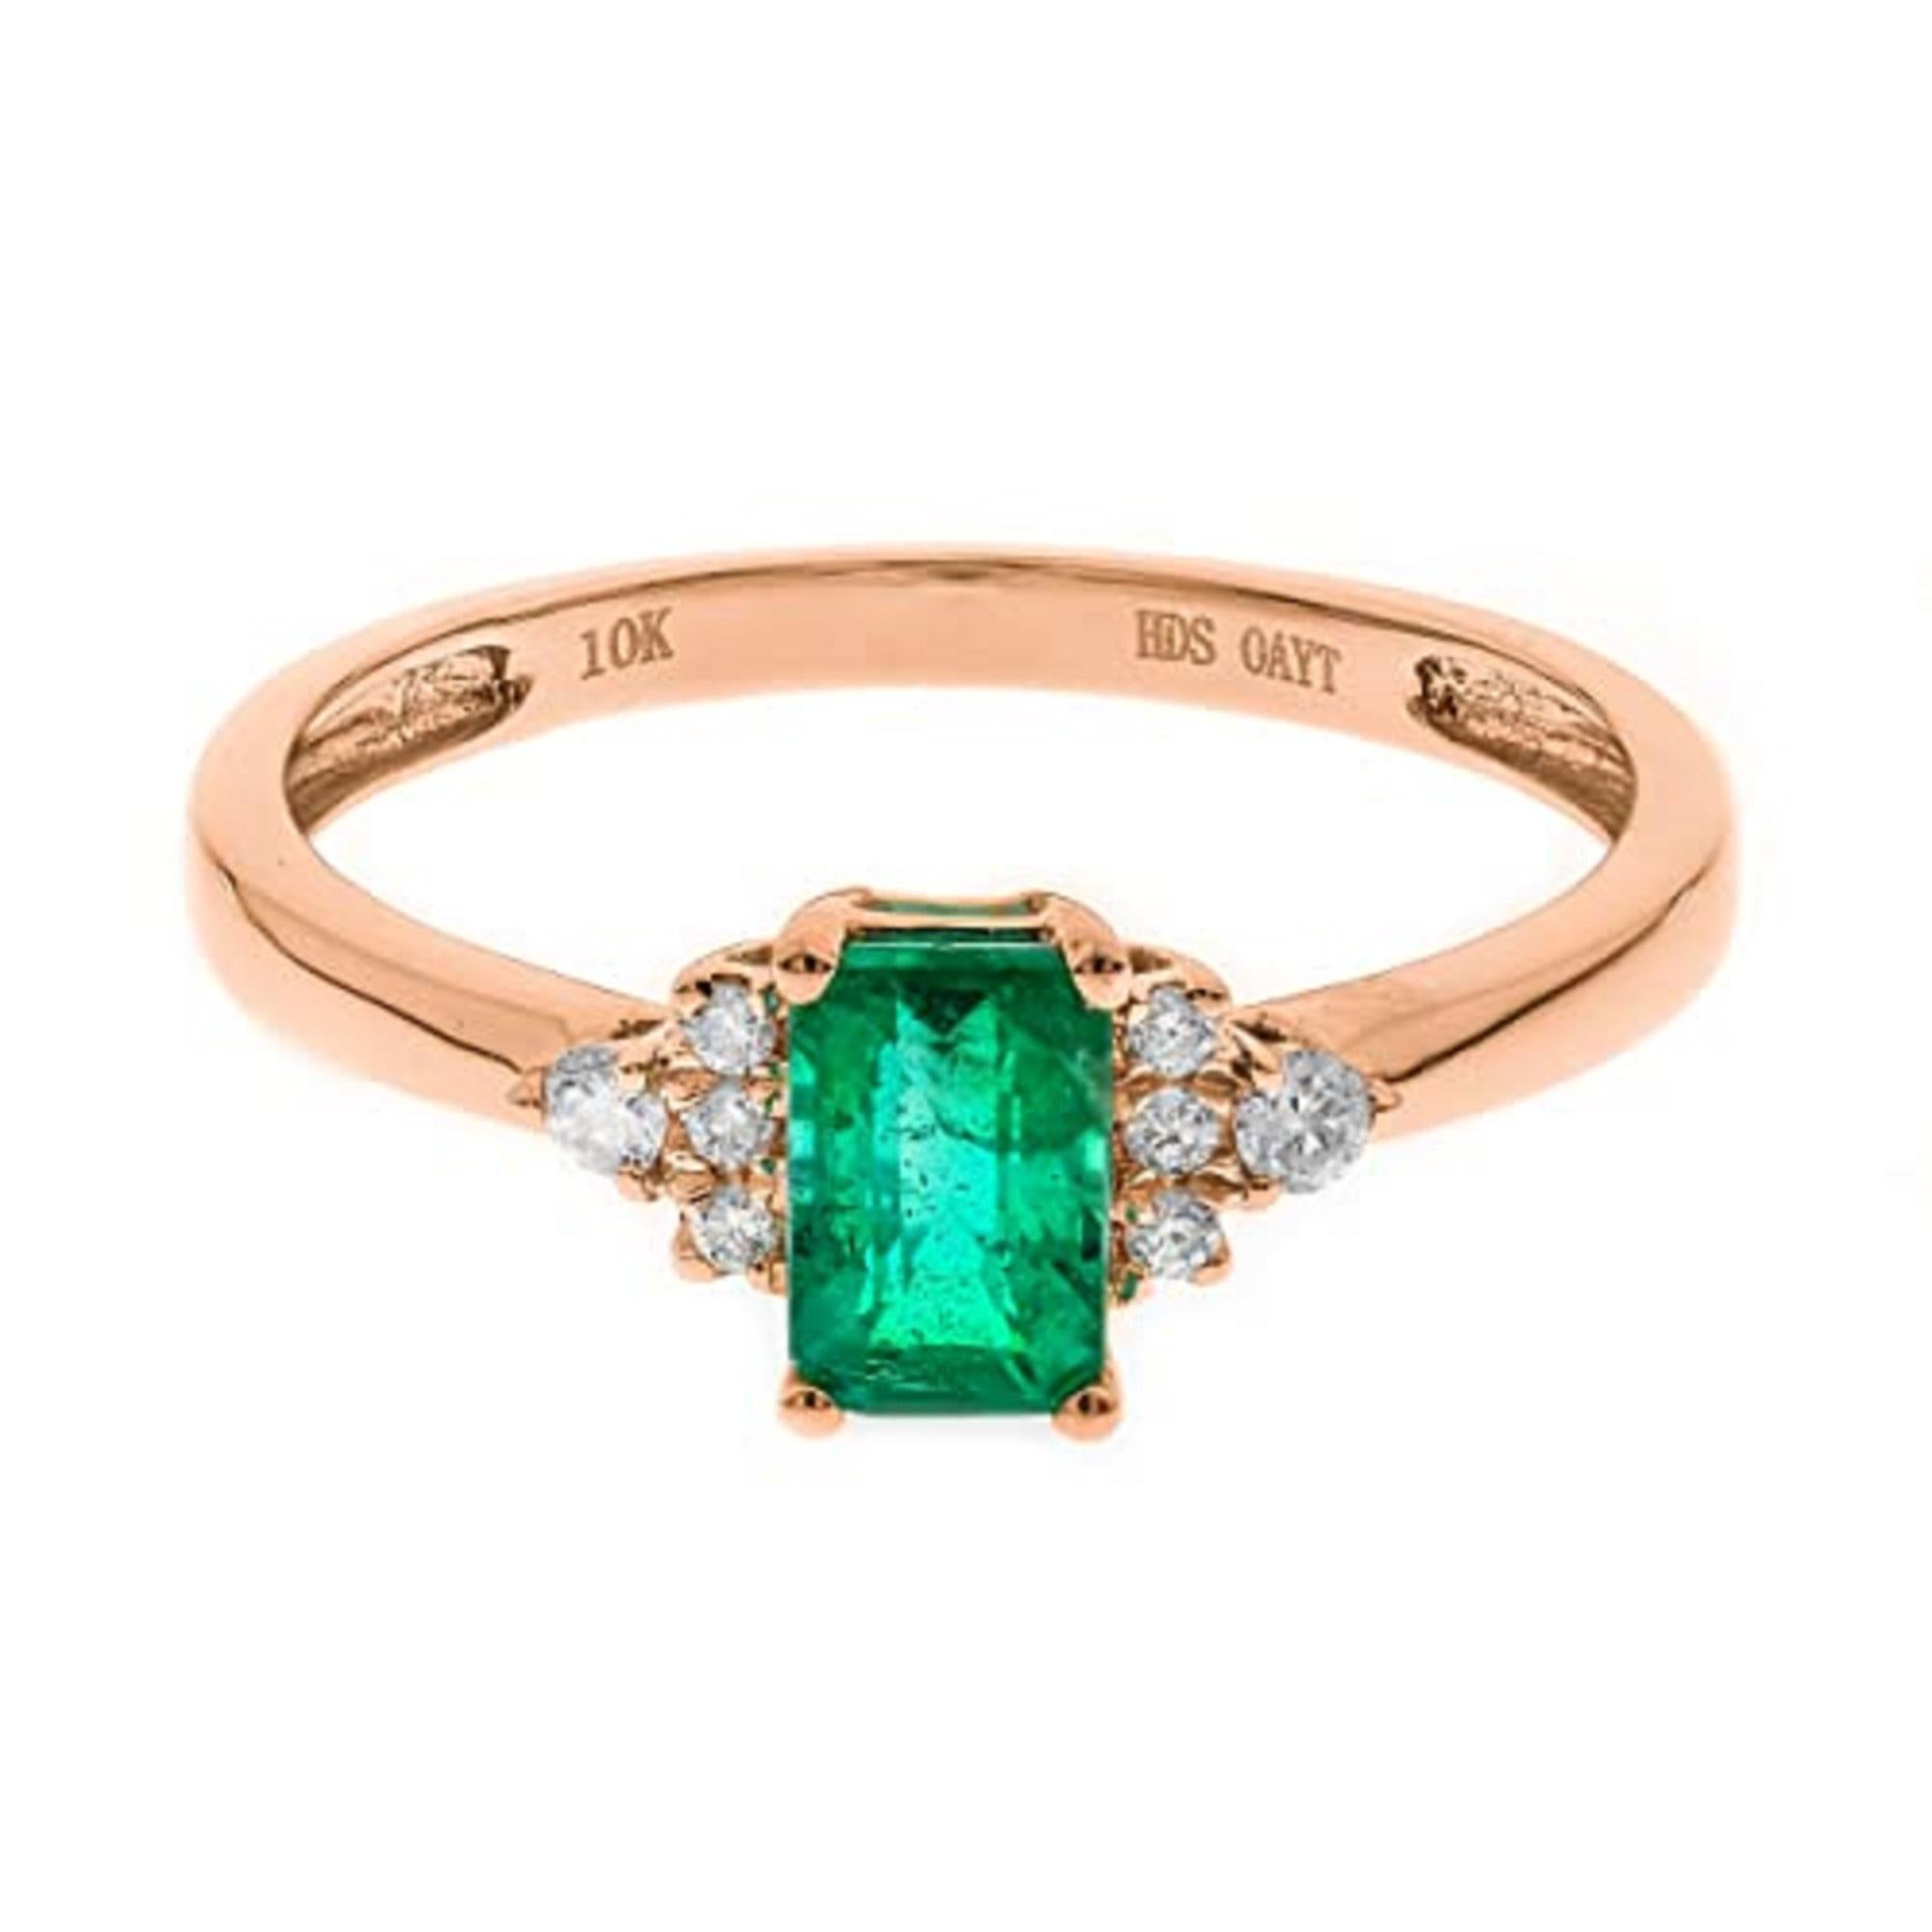 Emerald Cut Gin & Grace 10K Rose Gold Genuine Emerald Ring with Diamonds for women For Sale